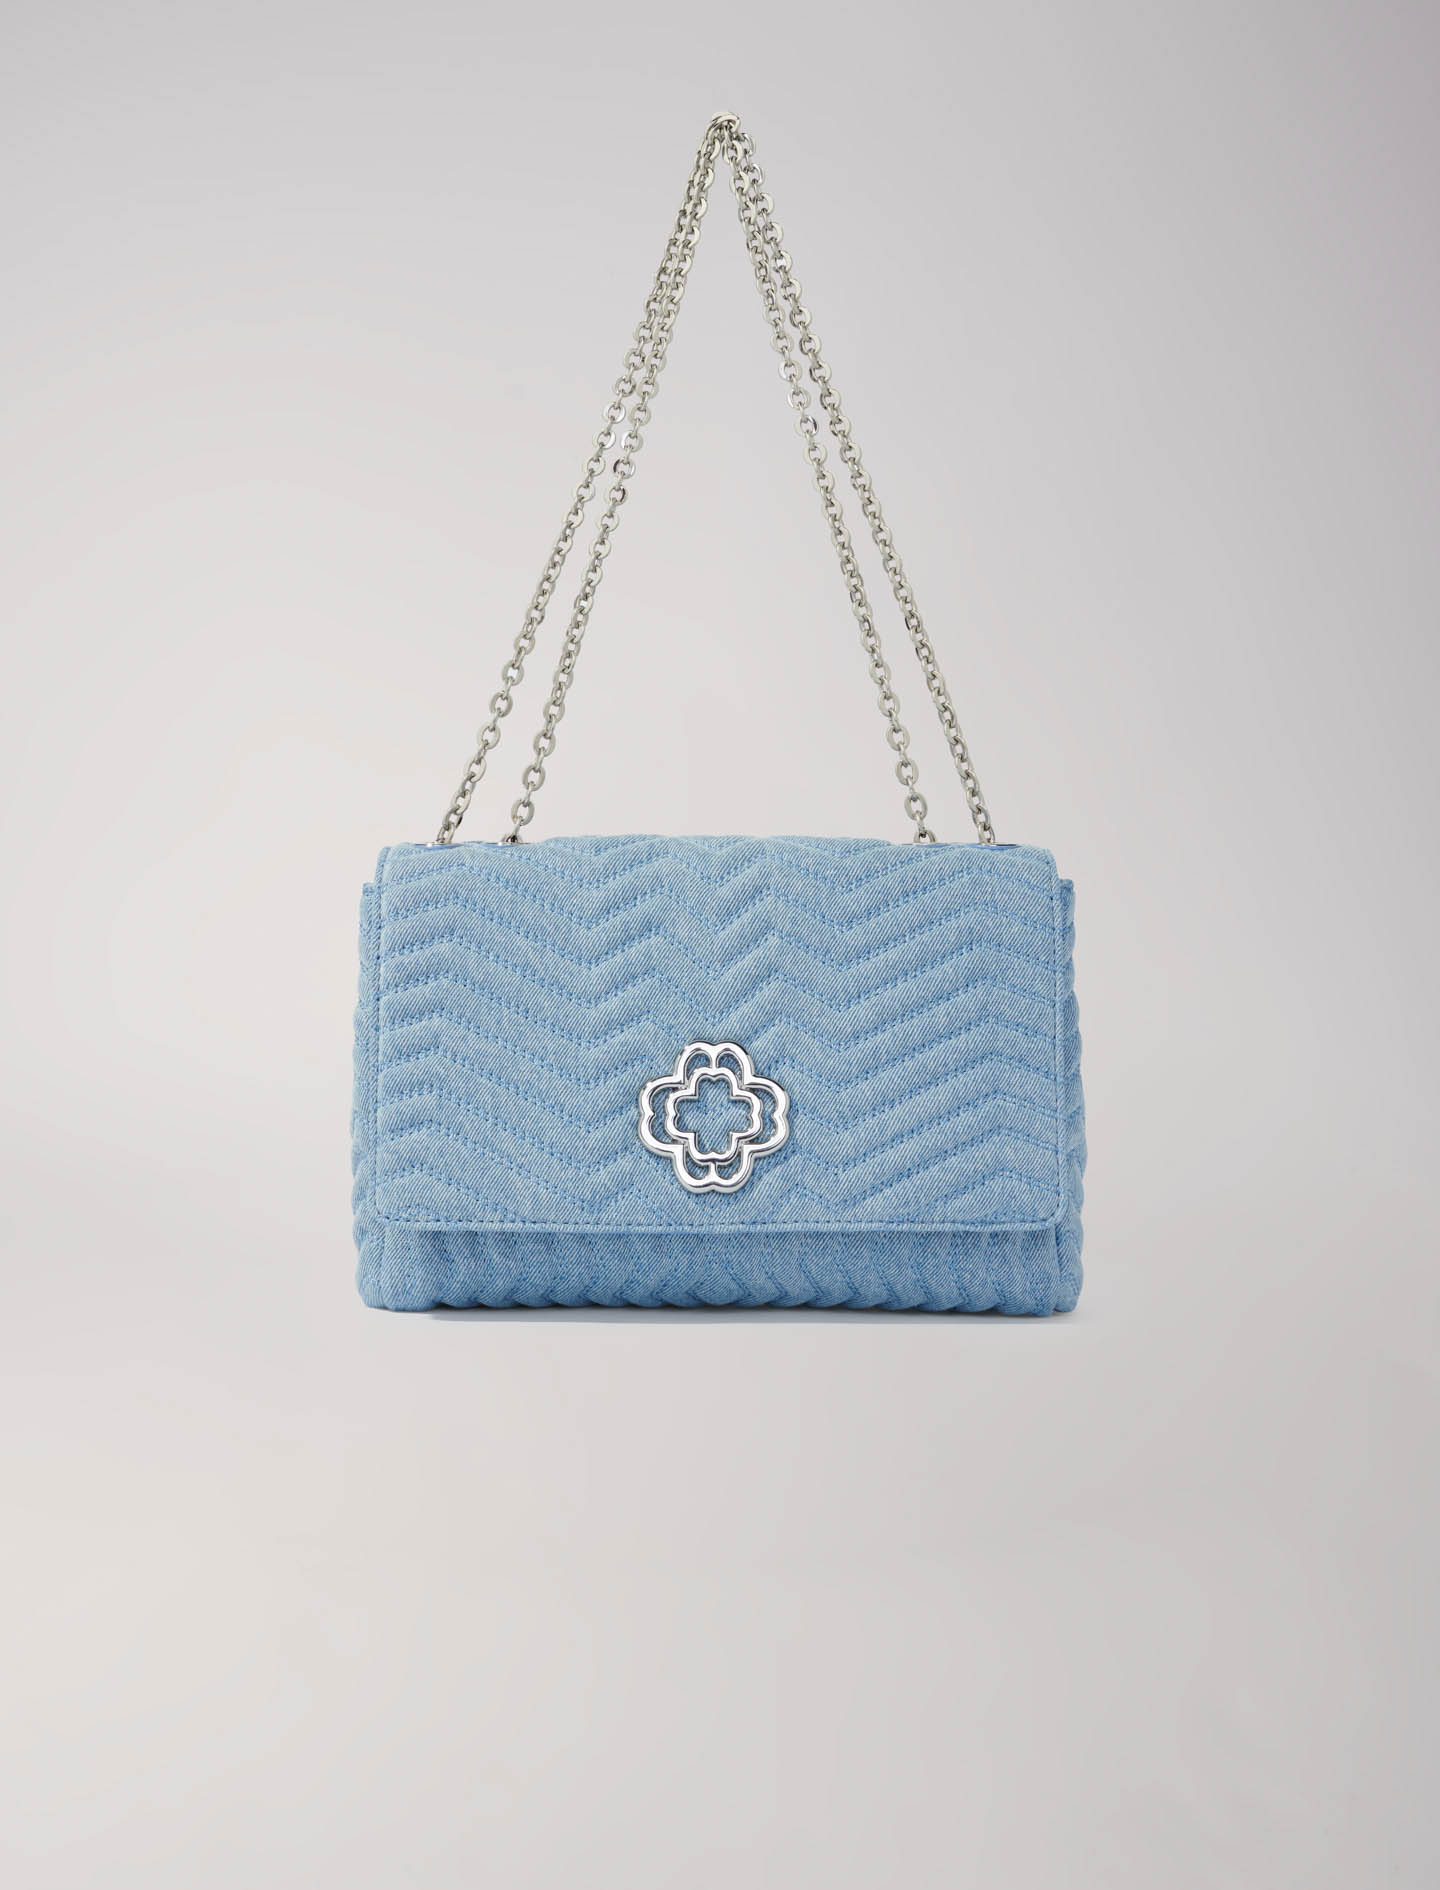 Mixte's cotton Lining: Cloverbloom denim bag for Spring/Summer, size Mixte-All Bags-OS (ONE SIZE), in color Denim /